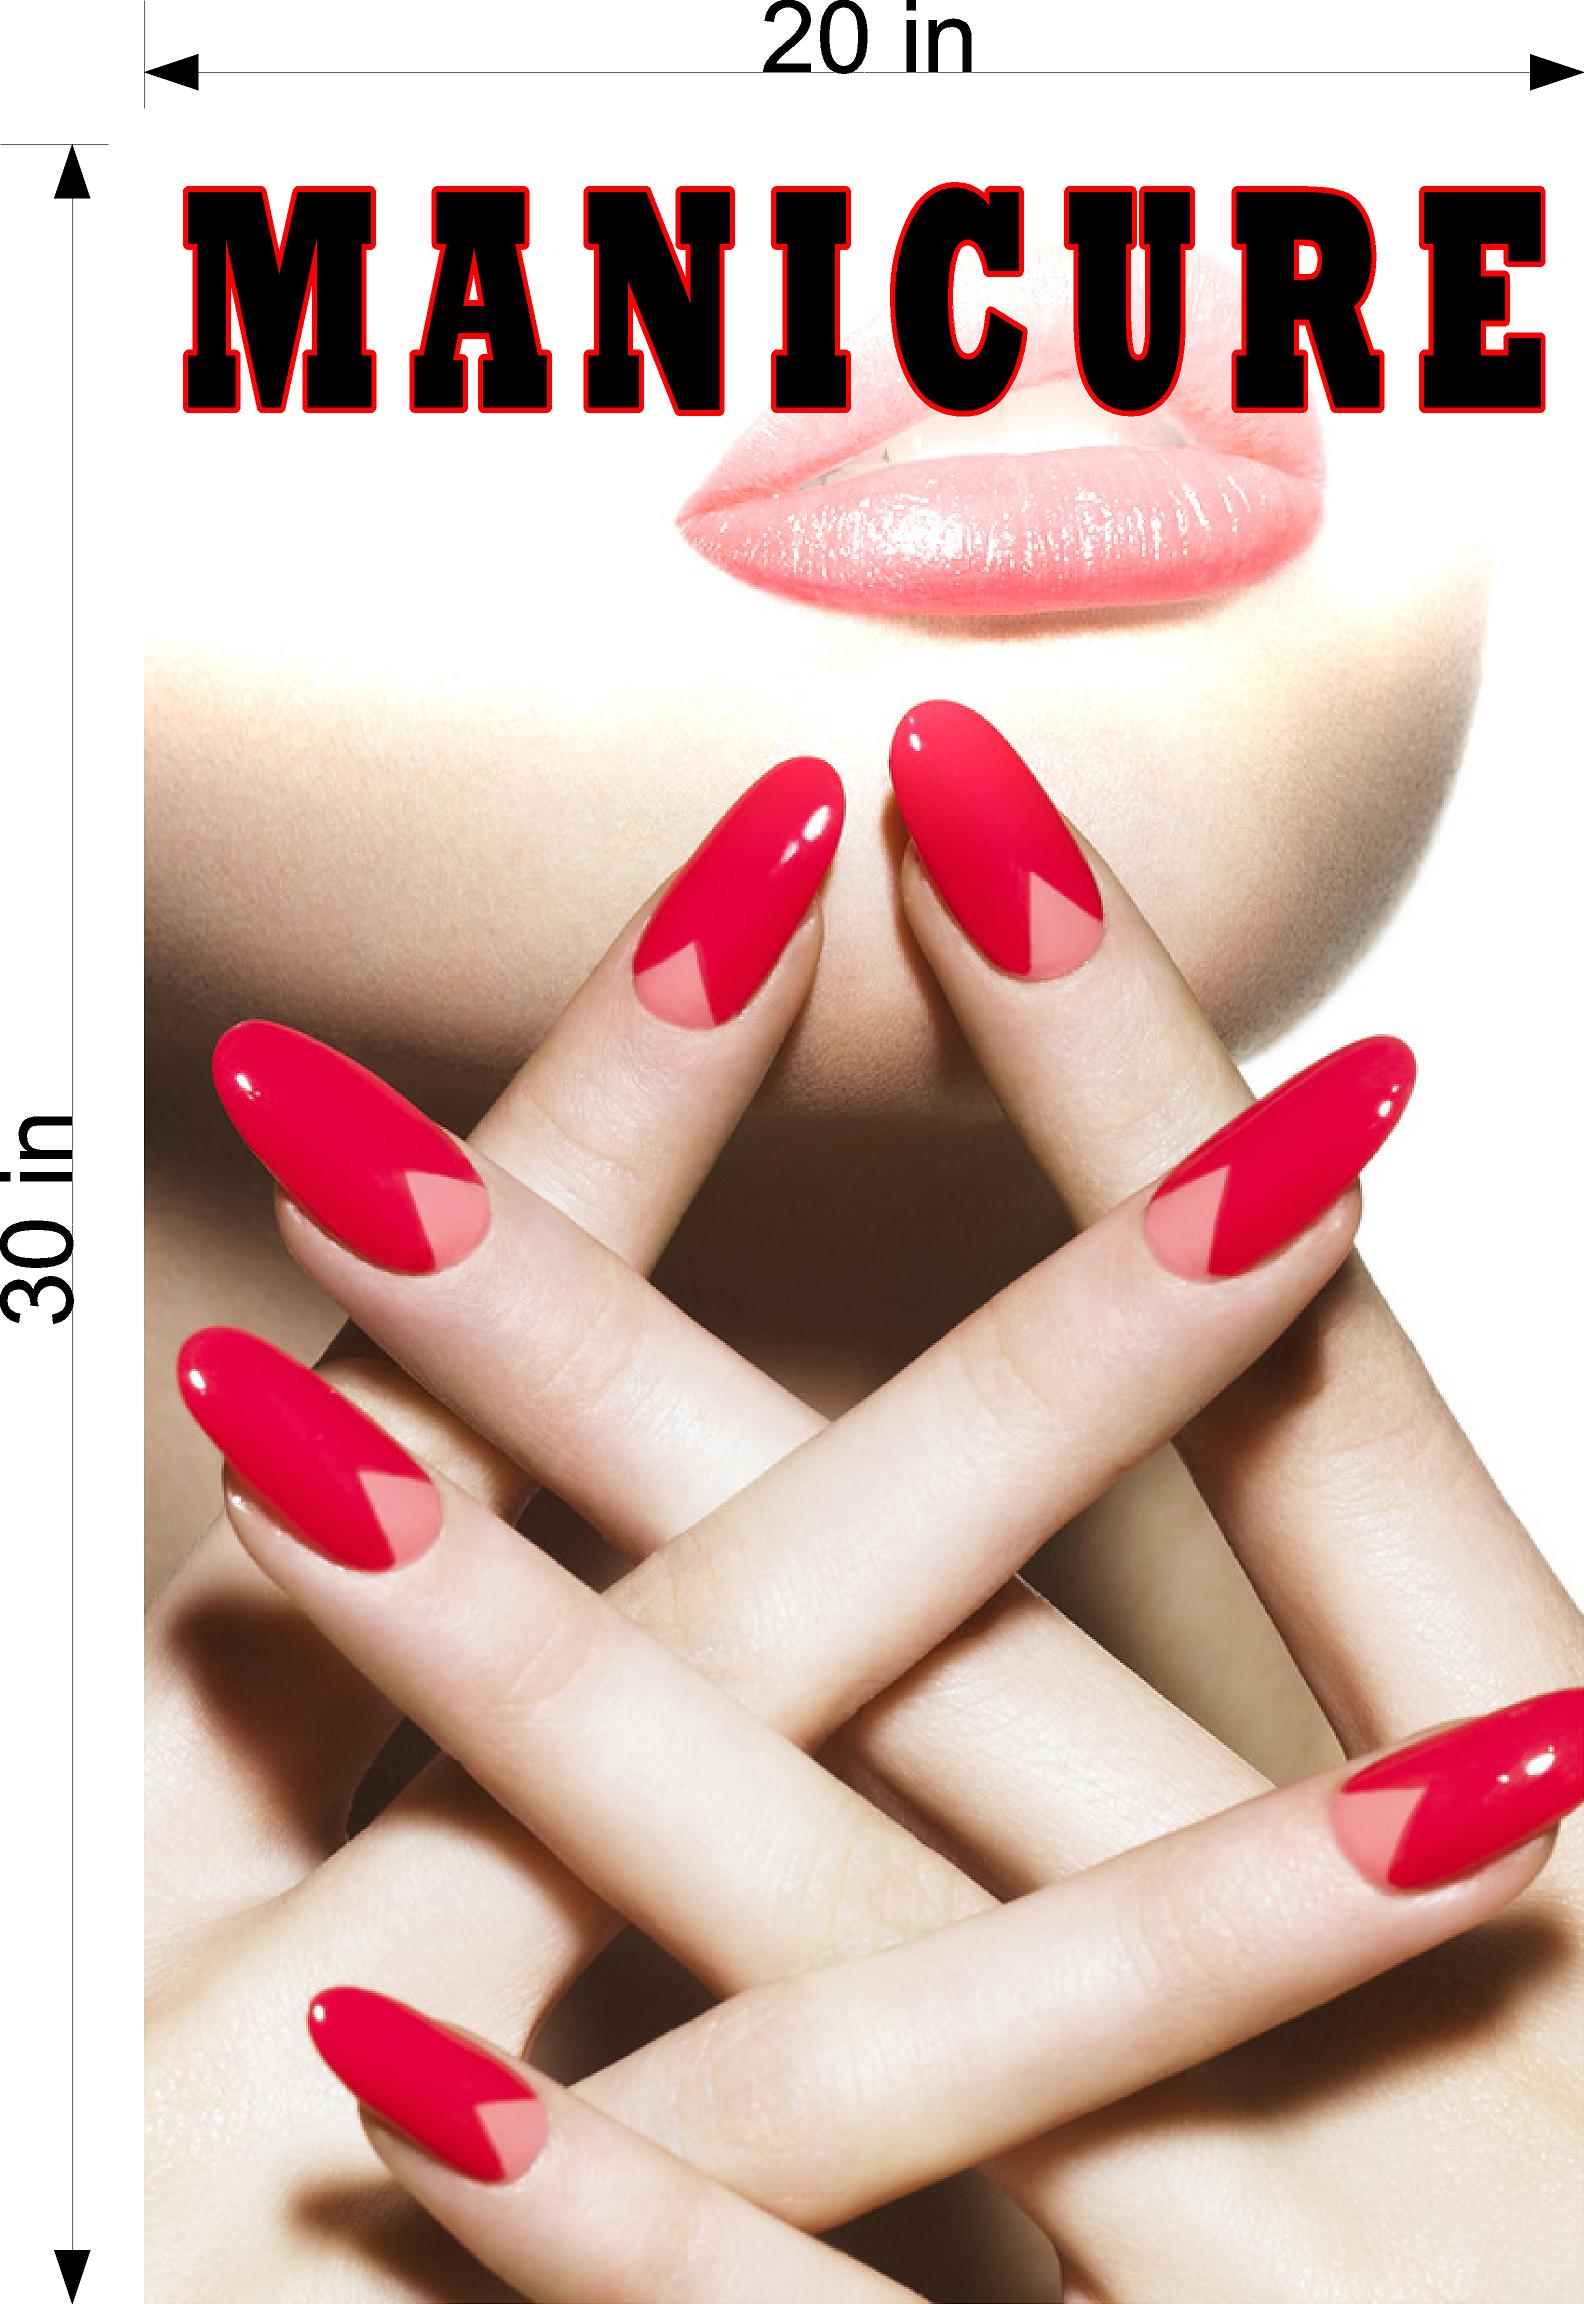 Manicure 14 Perforated Mesh One Way Vision See-Through Window Vinyl Nail Salon Sign Vertical